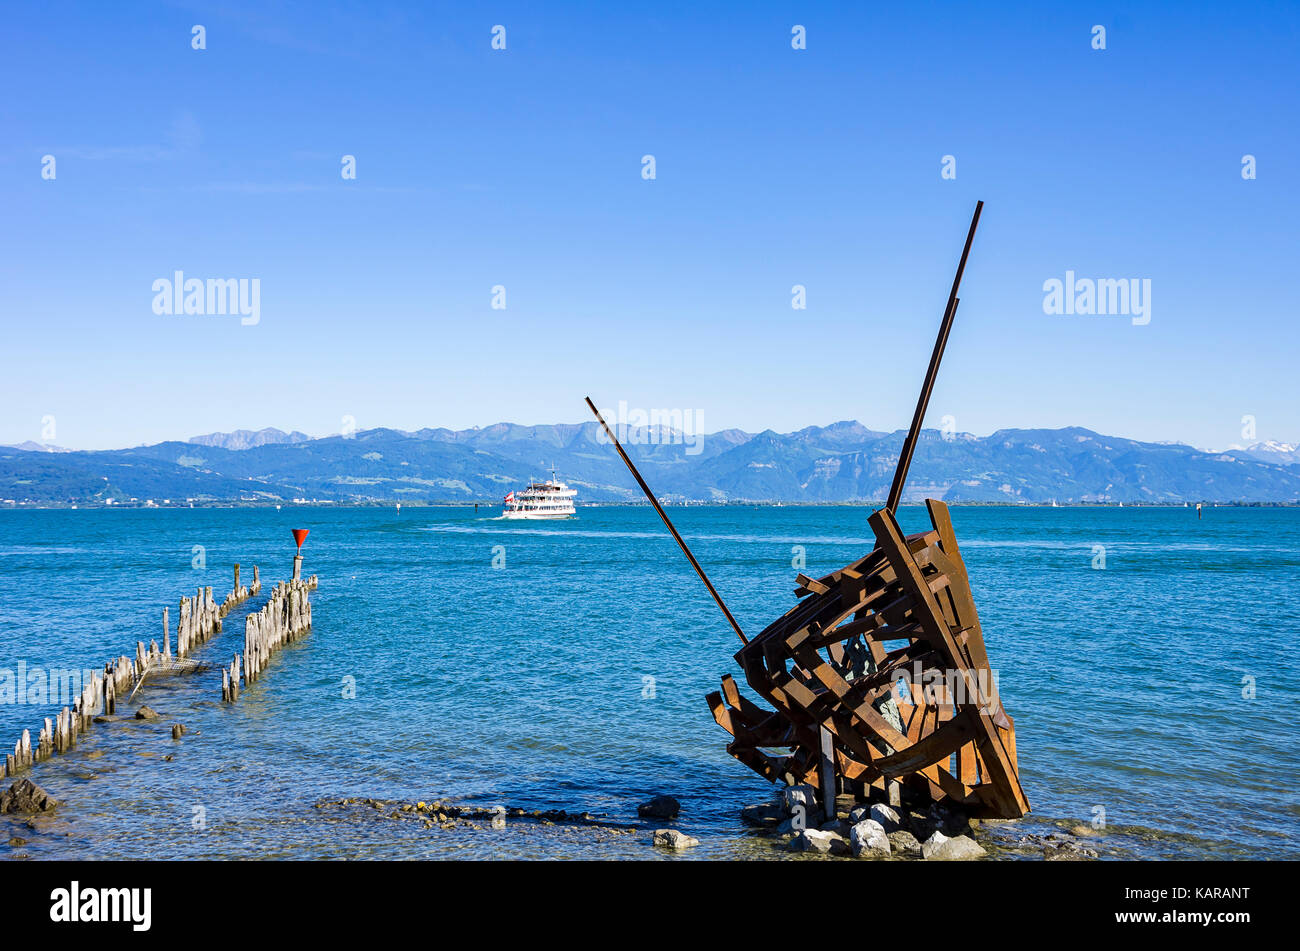 View across Lake Constance with shipwreck artwork Styx by Günther Stilling in the foreground, Wasserburg, Bavaria, Germany. Stock Photo